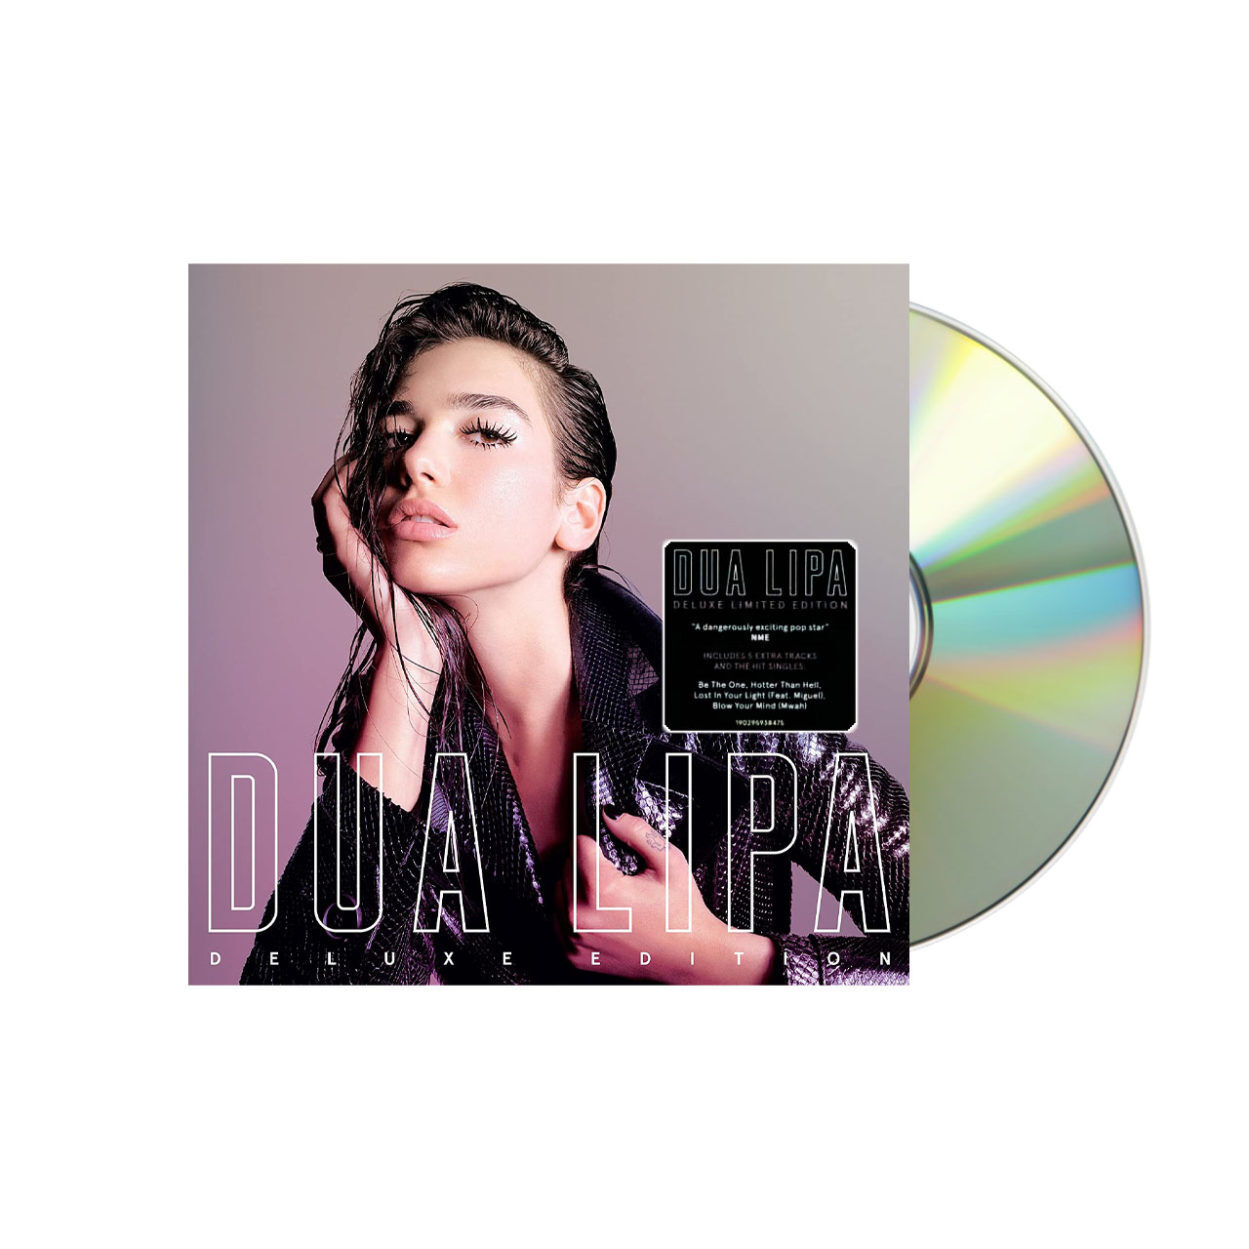 DUA LIPA Self Titled Deluxe Limited Edition CD